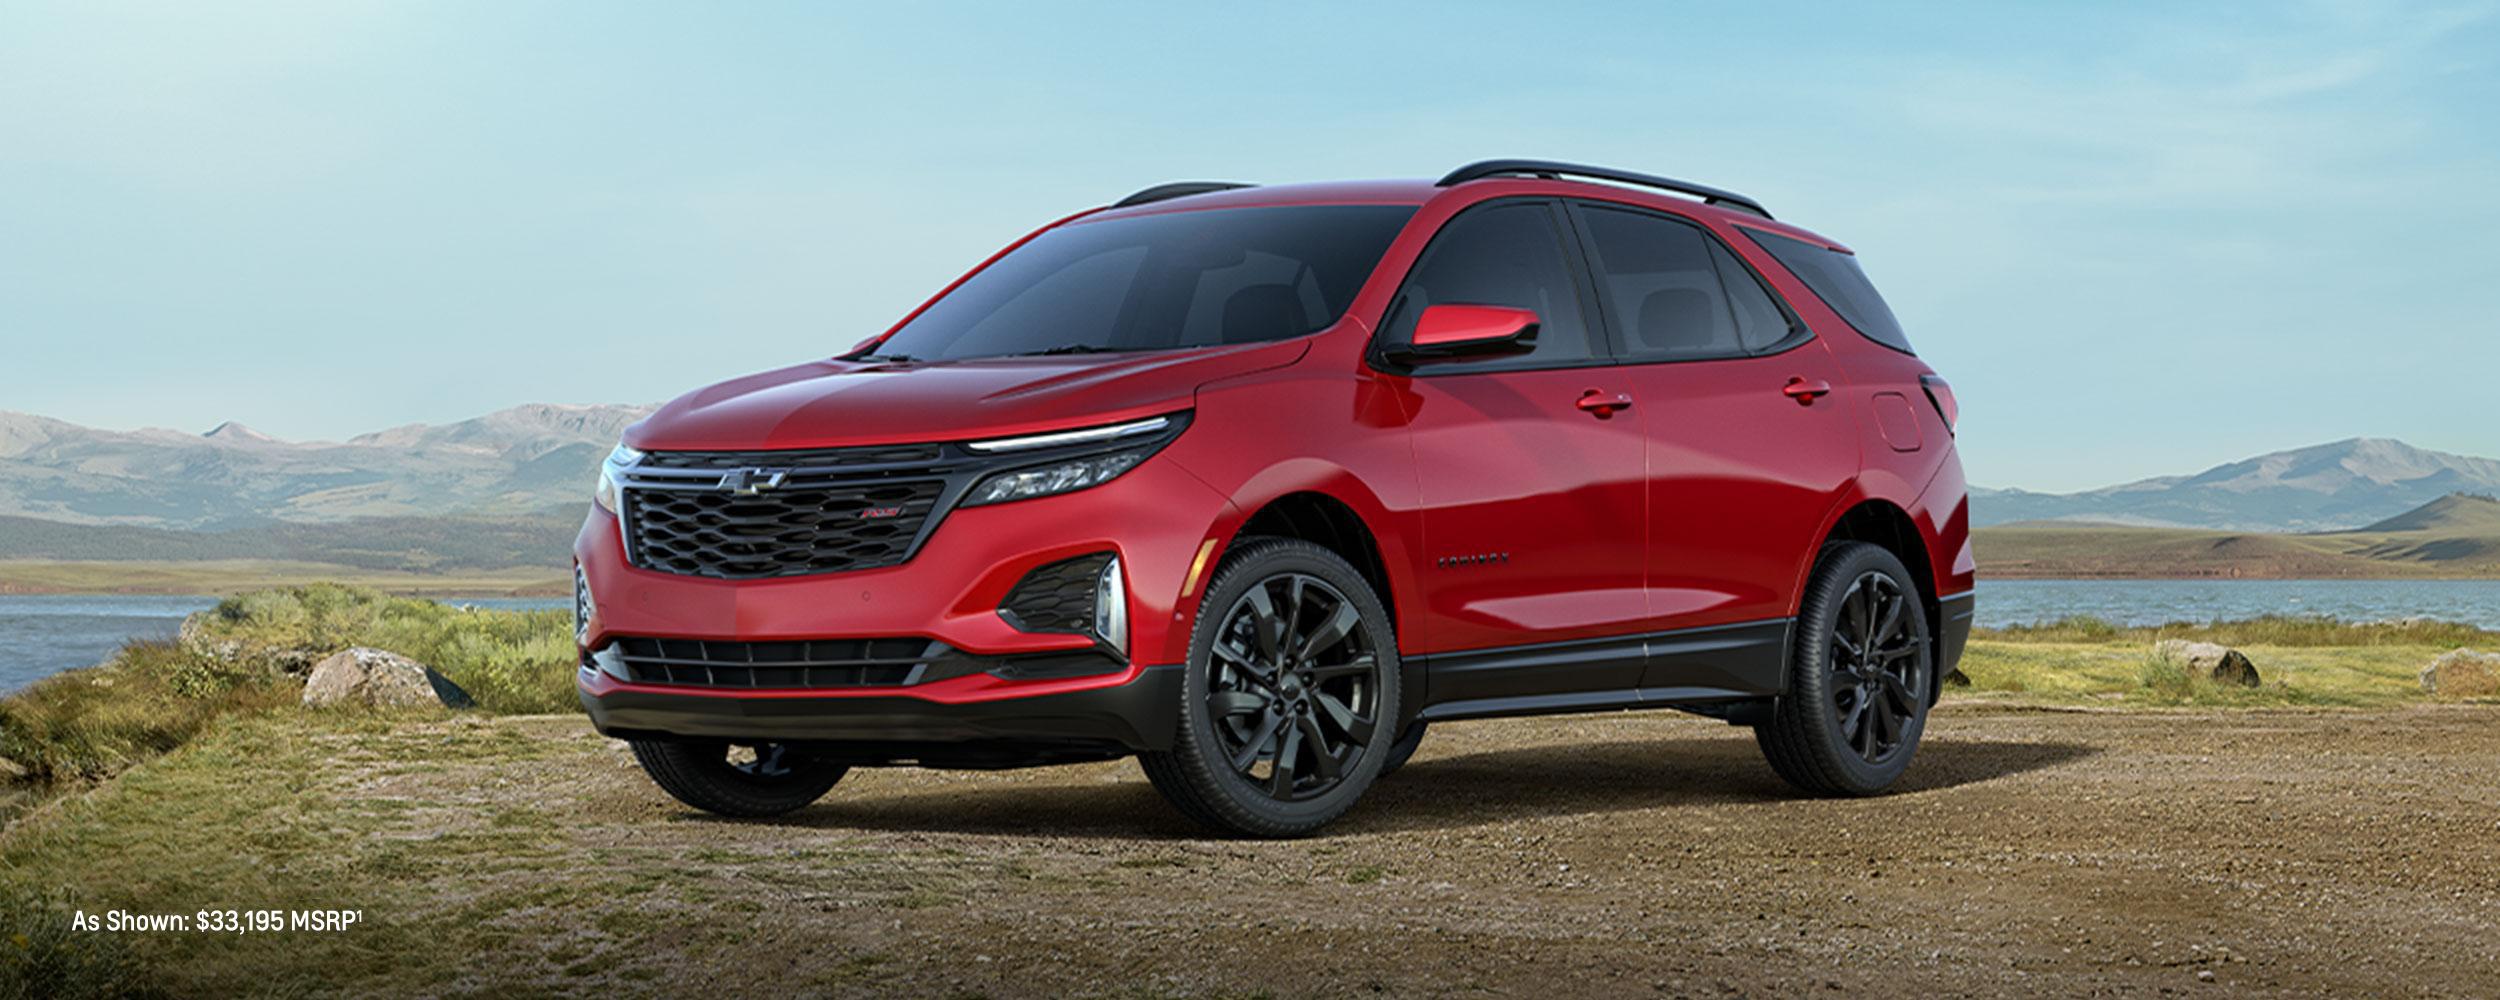 The 'Affordable' Electric SUV Has Arrived: 2023 Chevy Equinox EV